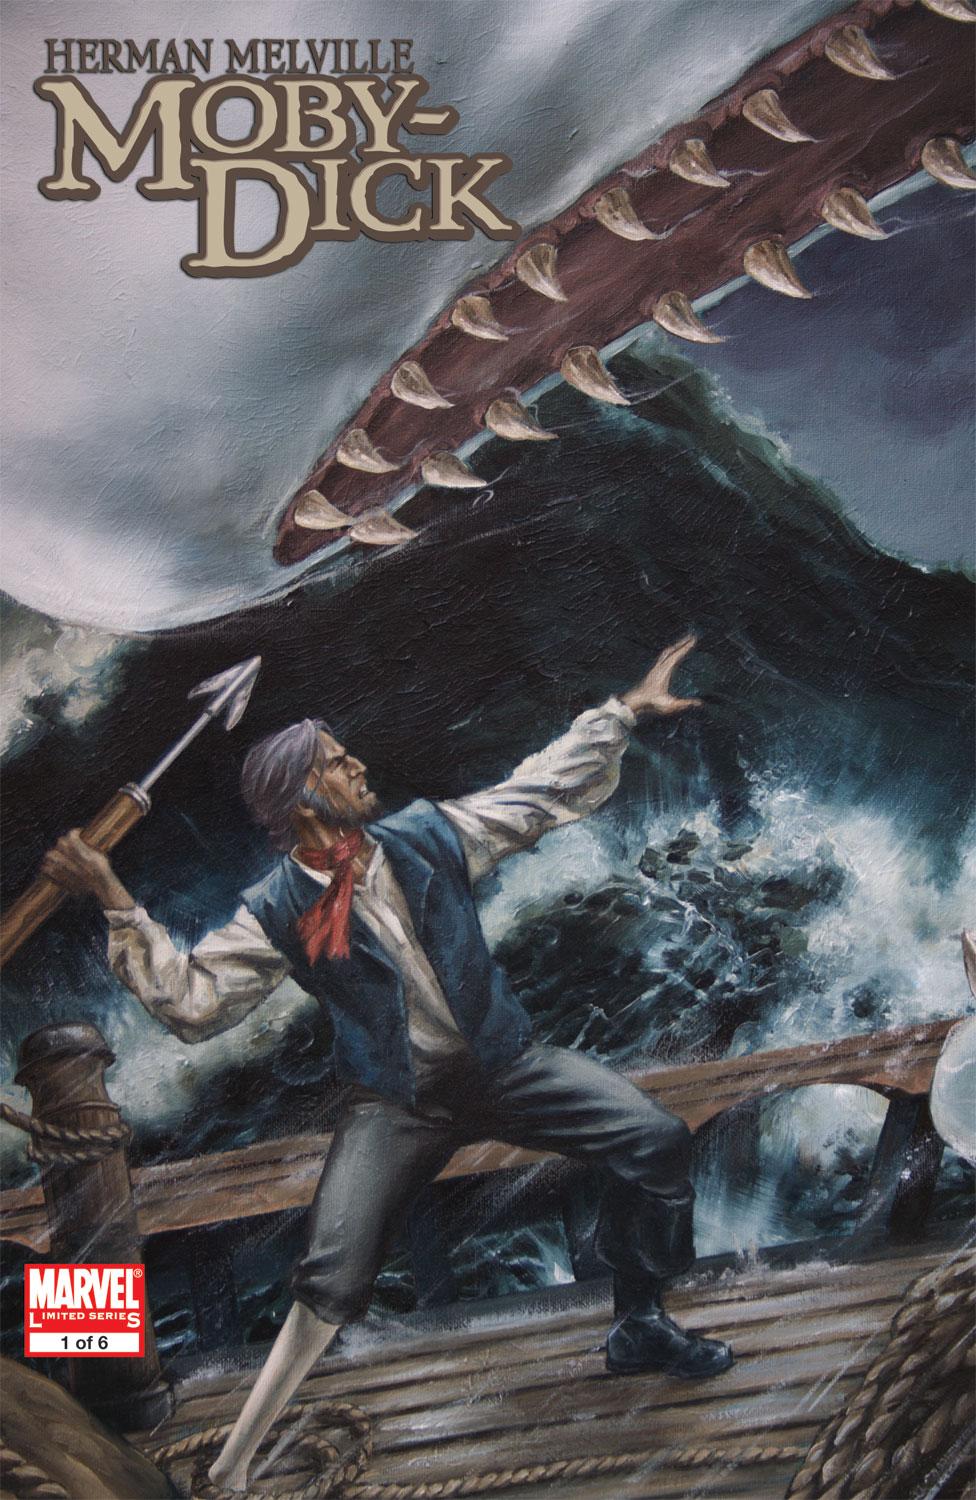 Marvel Illustrated: Moby Dick (2007) #1